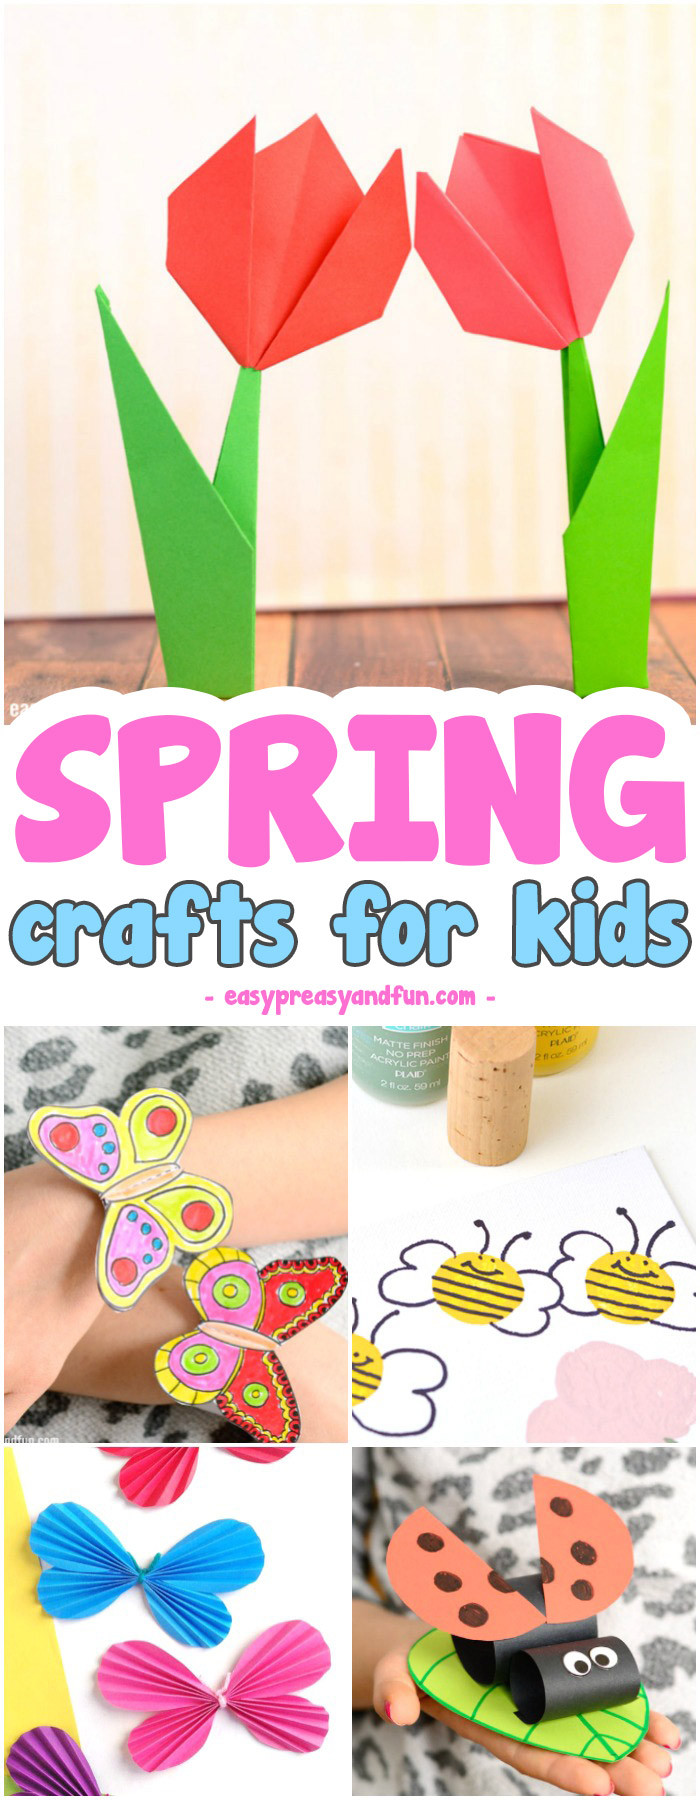 Free Craft Ideas For Kids
 Spring Crafts for Kids Art and Craft Project Ideas for